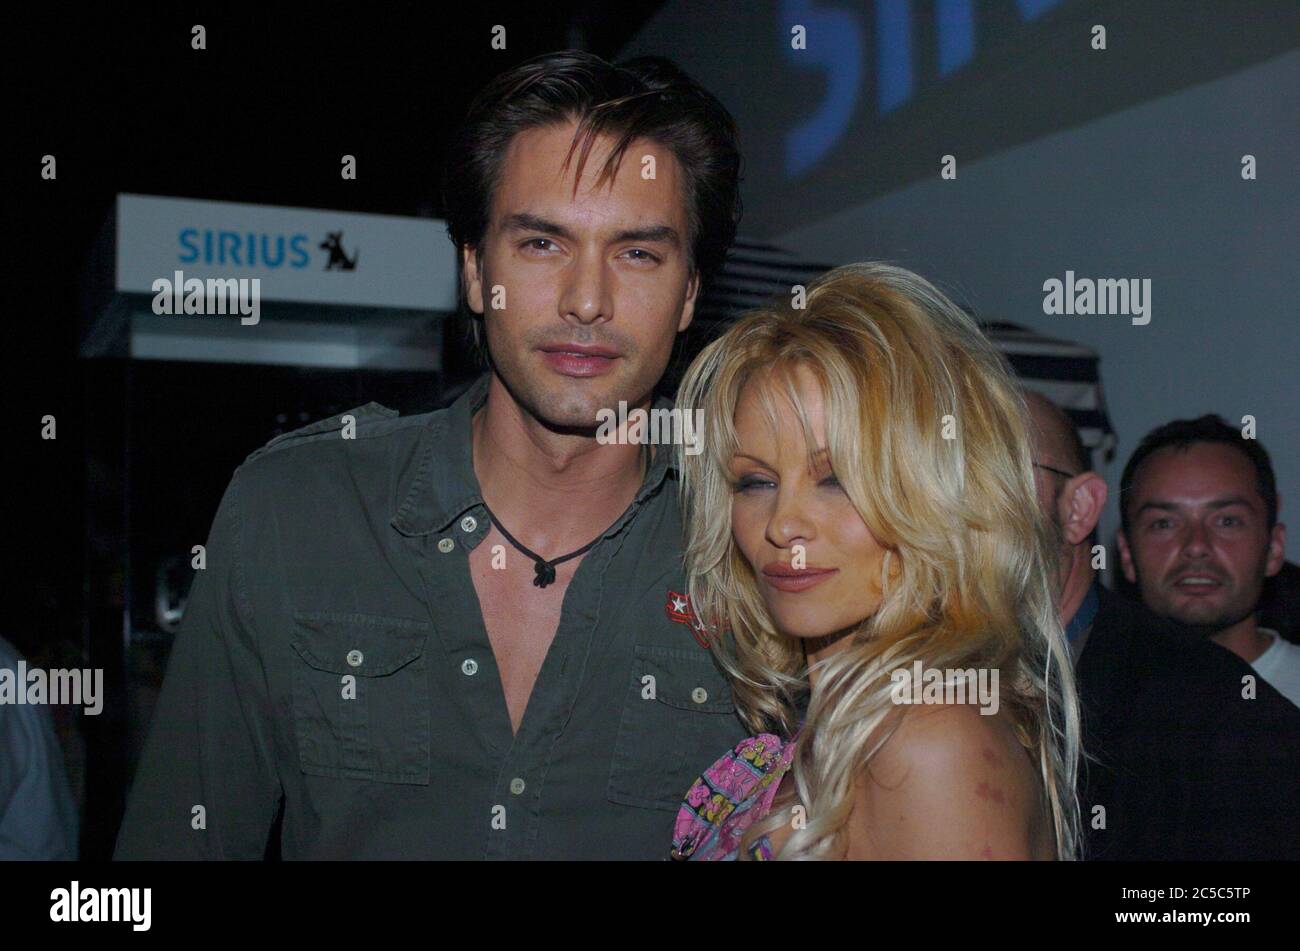 United States Of America. 19th Feb, 2004. MIAMI BEACH, FL - FEBRUARY 19: Pamela Anderson and male super model Marcus Schenkenberg on February 19, 2004 in Miami, Florida People: Pamela Anderson, Marcus Schenkenberg Credit: Storms Media Group/Alamy Live News Stock Photo